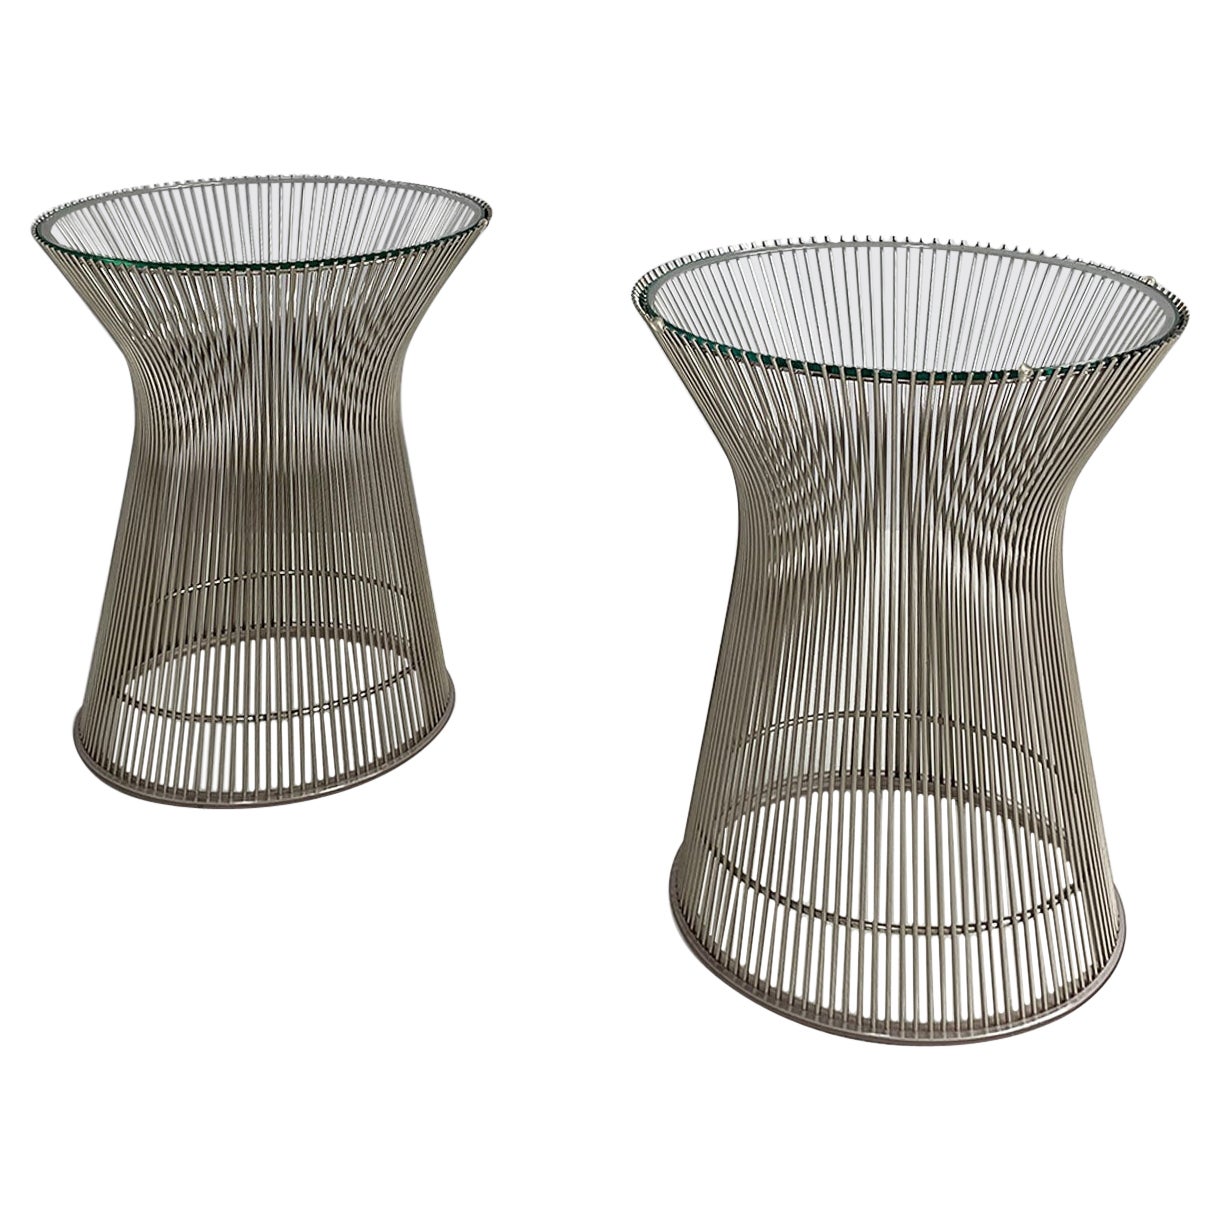 Italian modern steel and crystal side tables by Warren Platner for Knoll, 1966